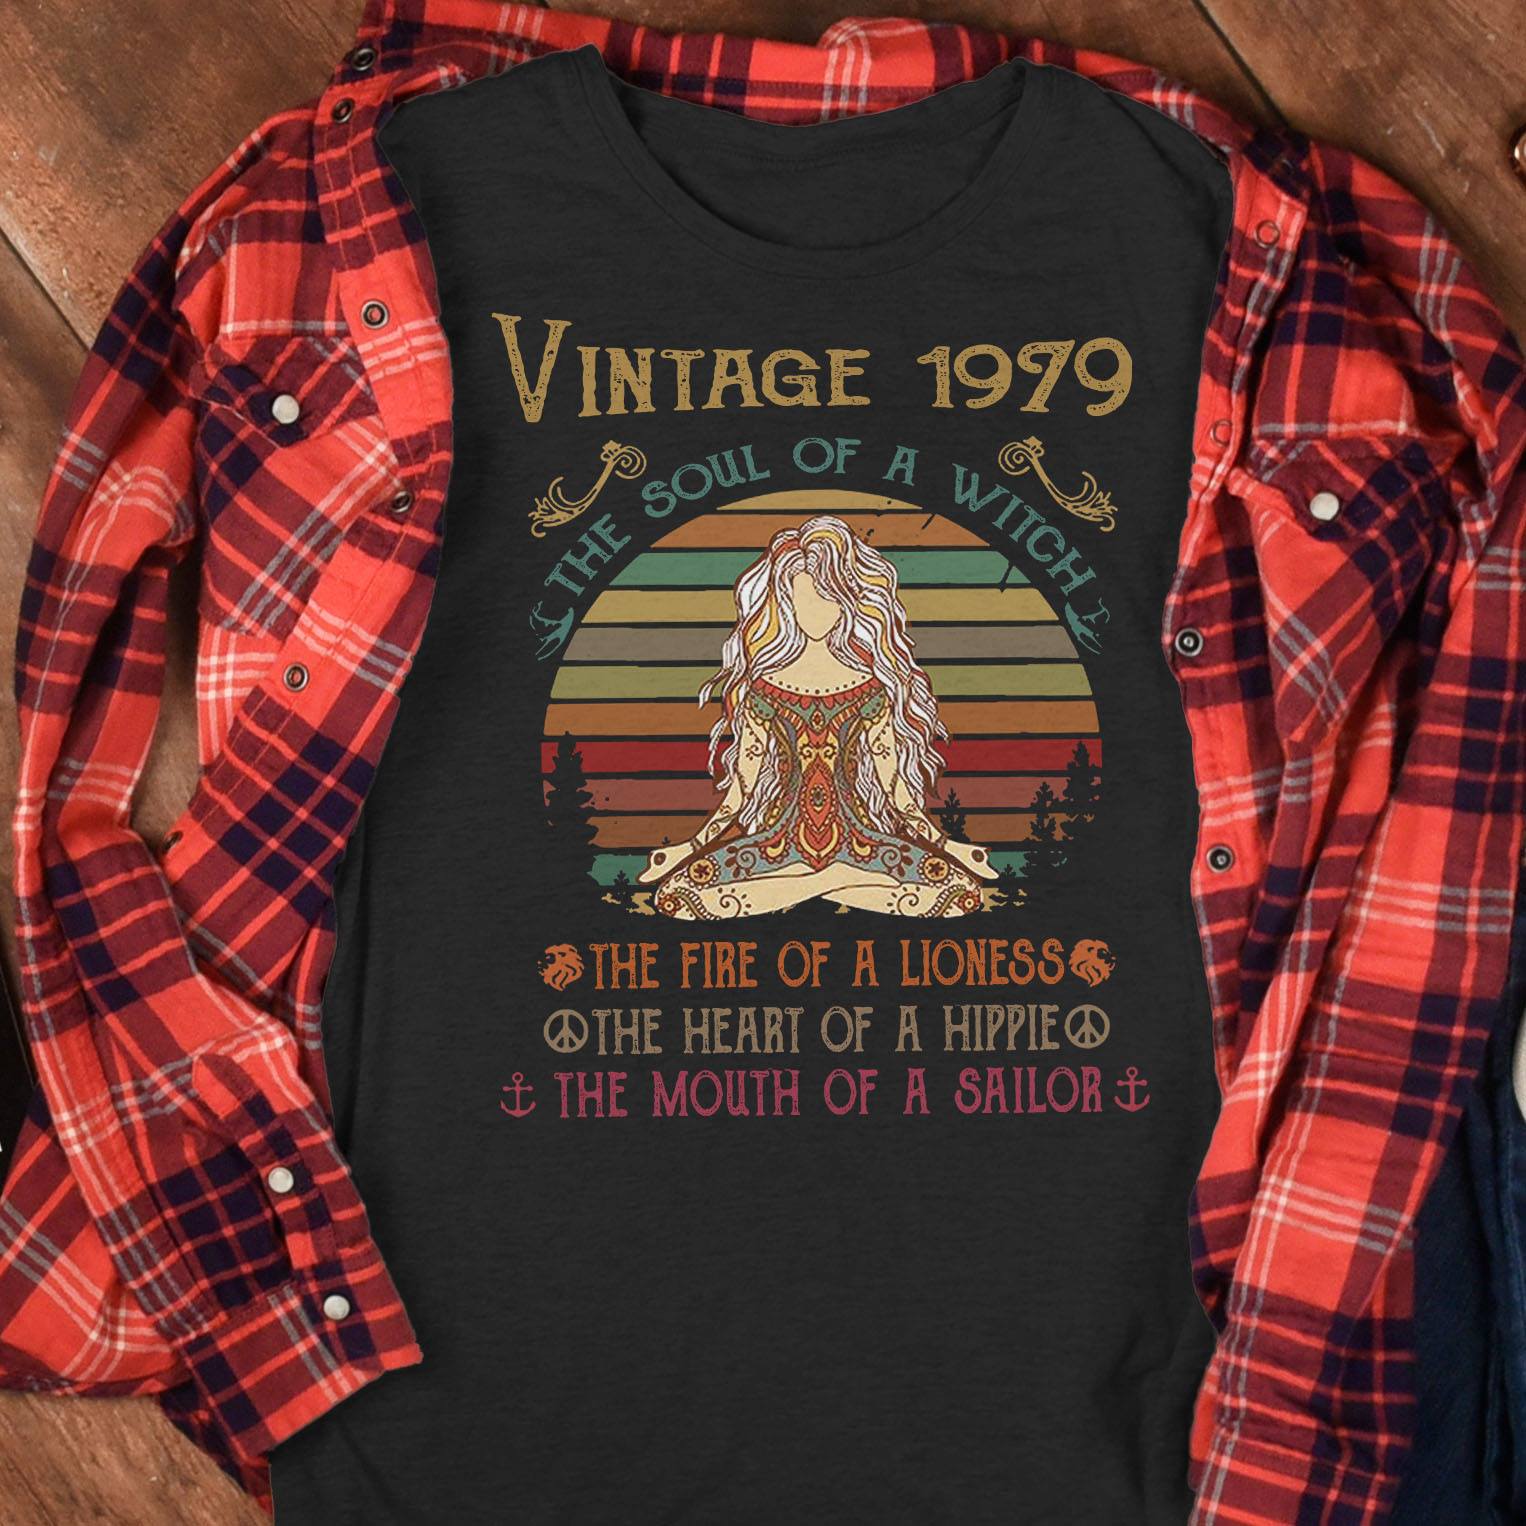 Vintage 1979, The Soul Of A Witch, Birthday Gifts Idea, Gift For Her For Him Unisex T-Shirt KM0704